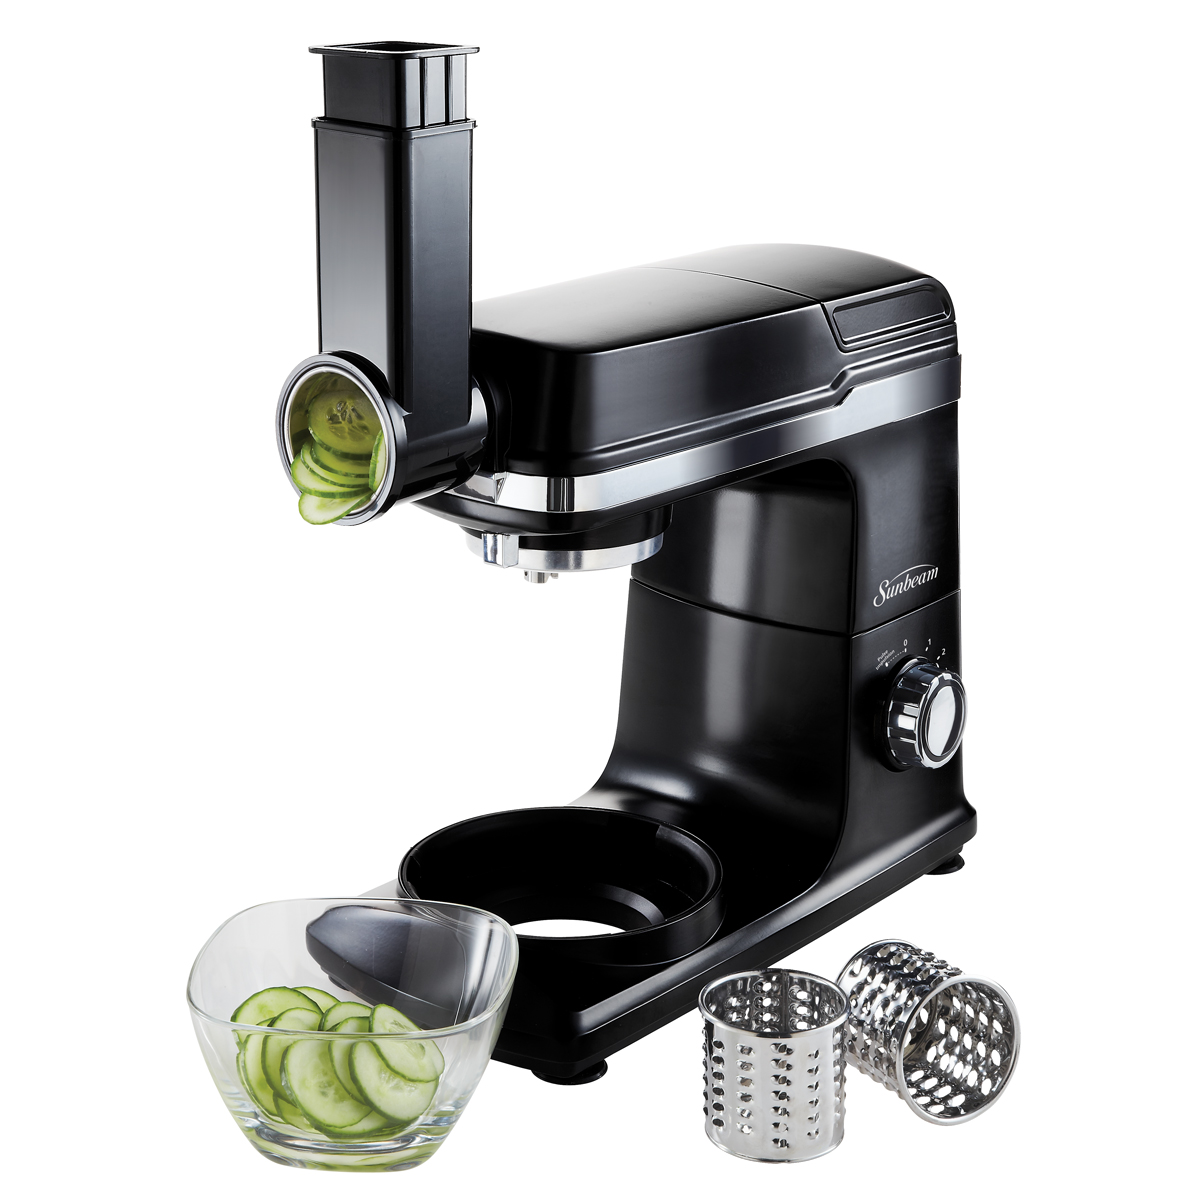 Sunbeam® Mixmaster® Planetary Stand Mixer Slow Juicer Attachment